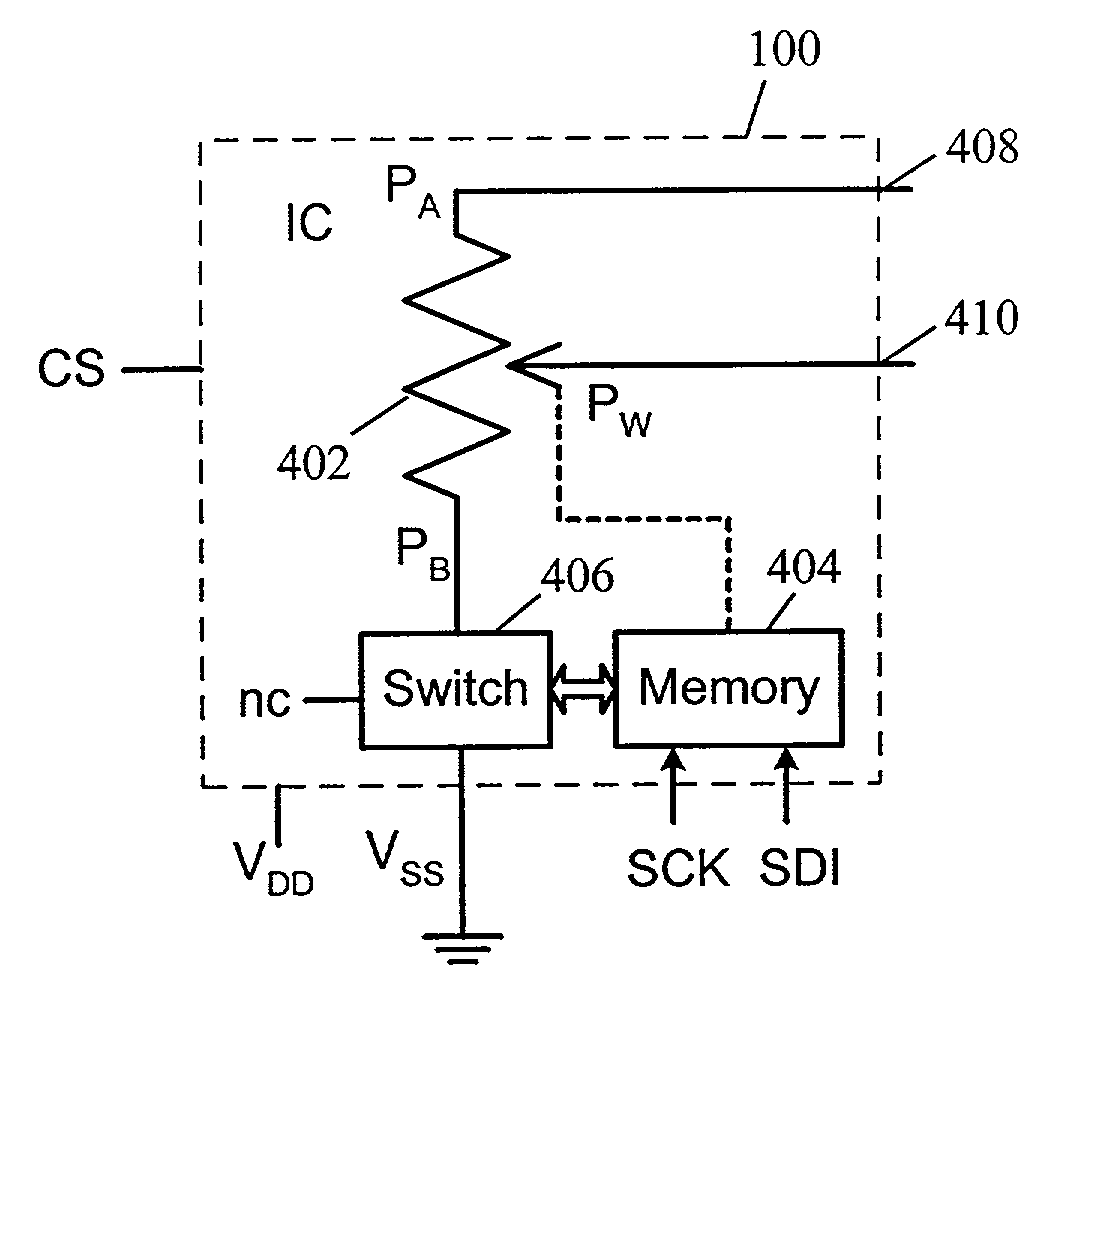 Apparatus and method for a two terminal implementation of rheostat and potentiometer modes in an integrated circuit